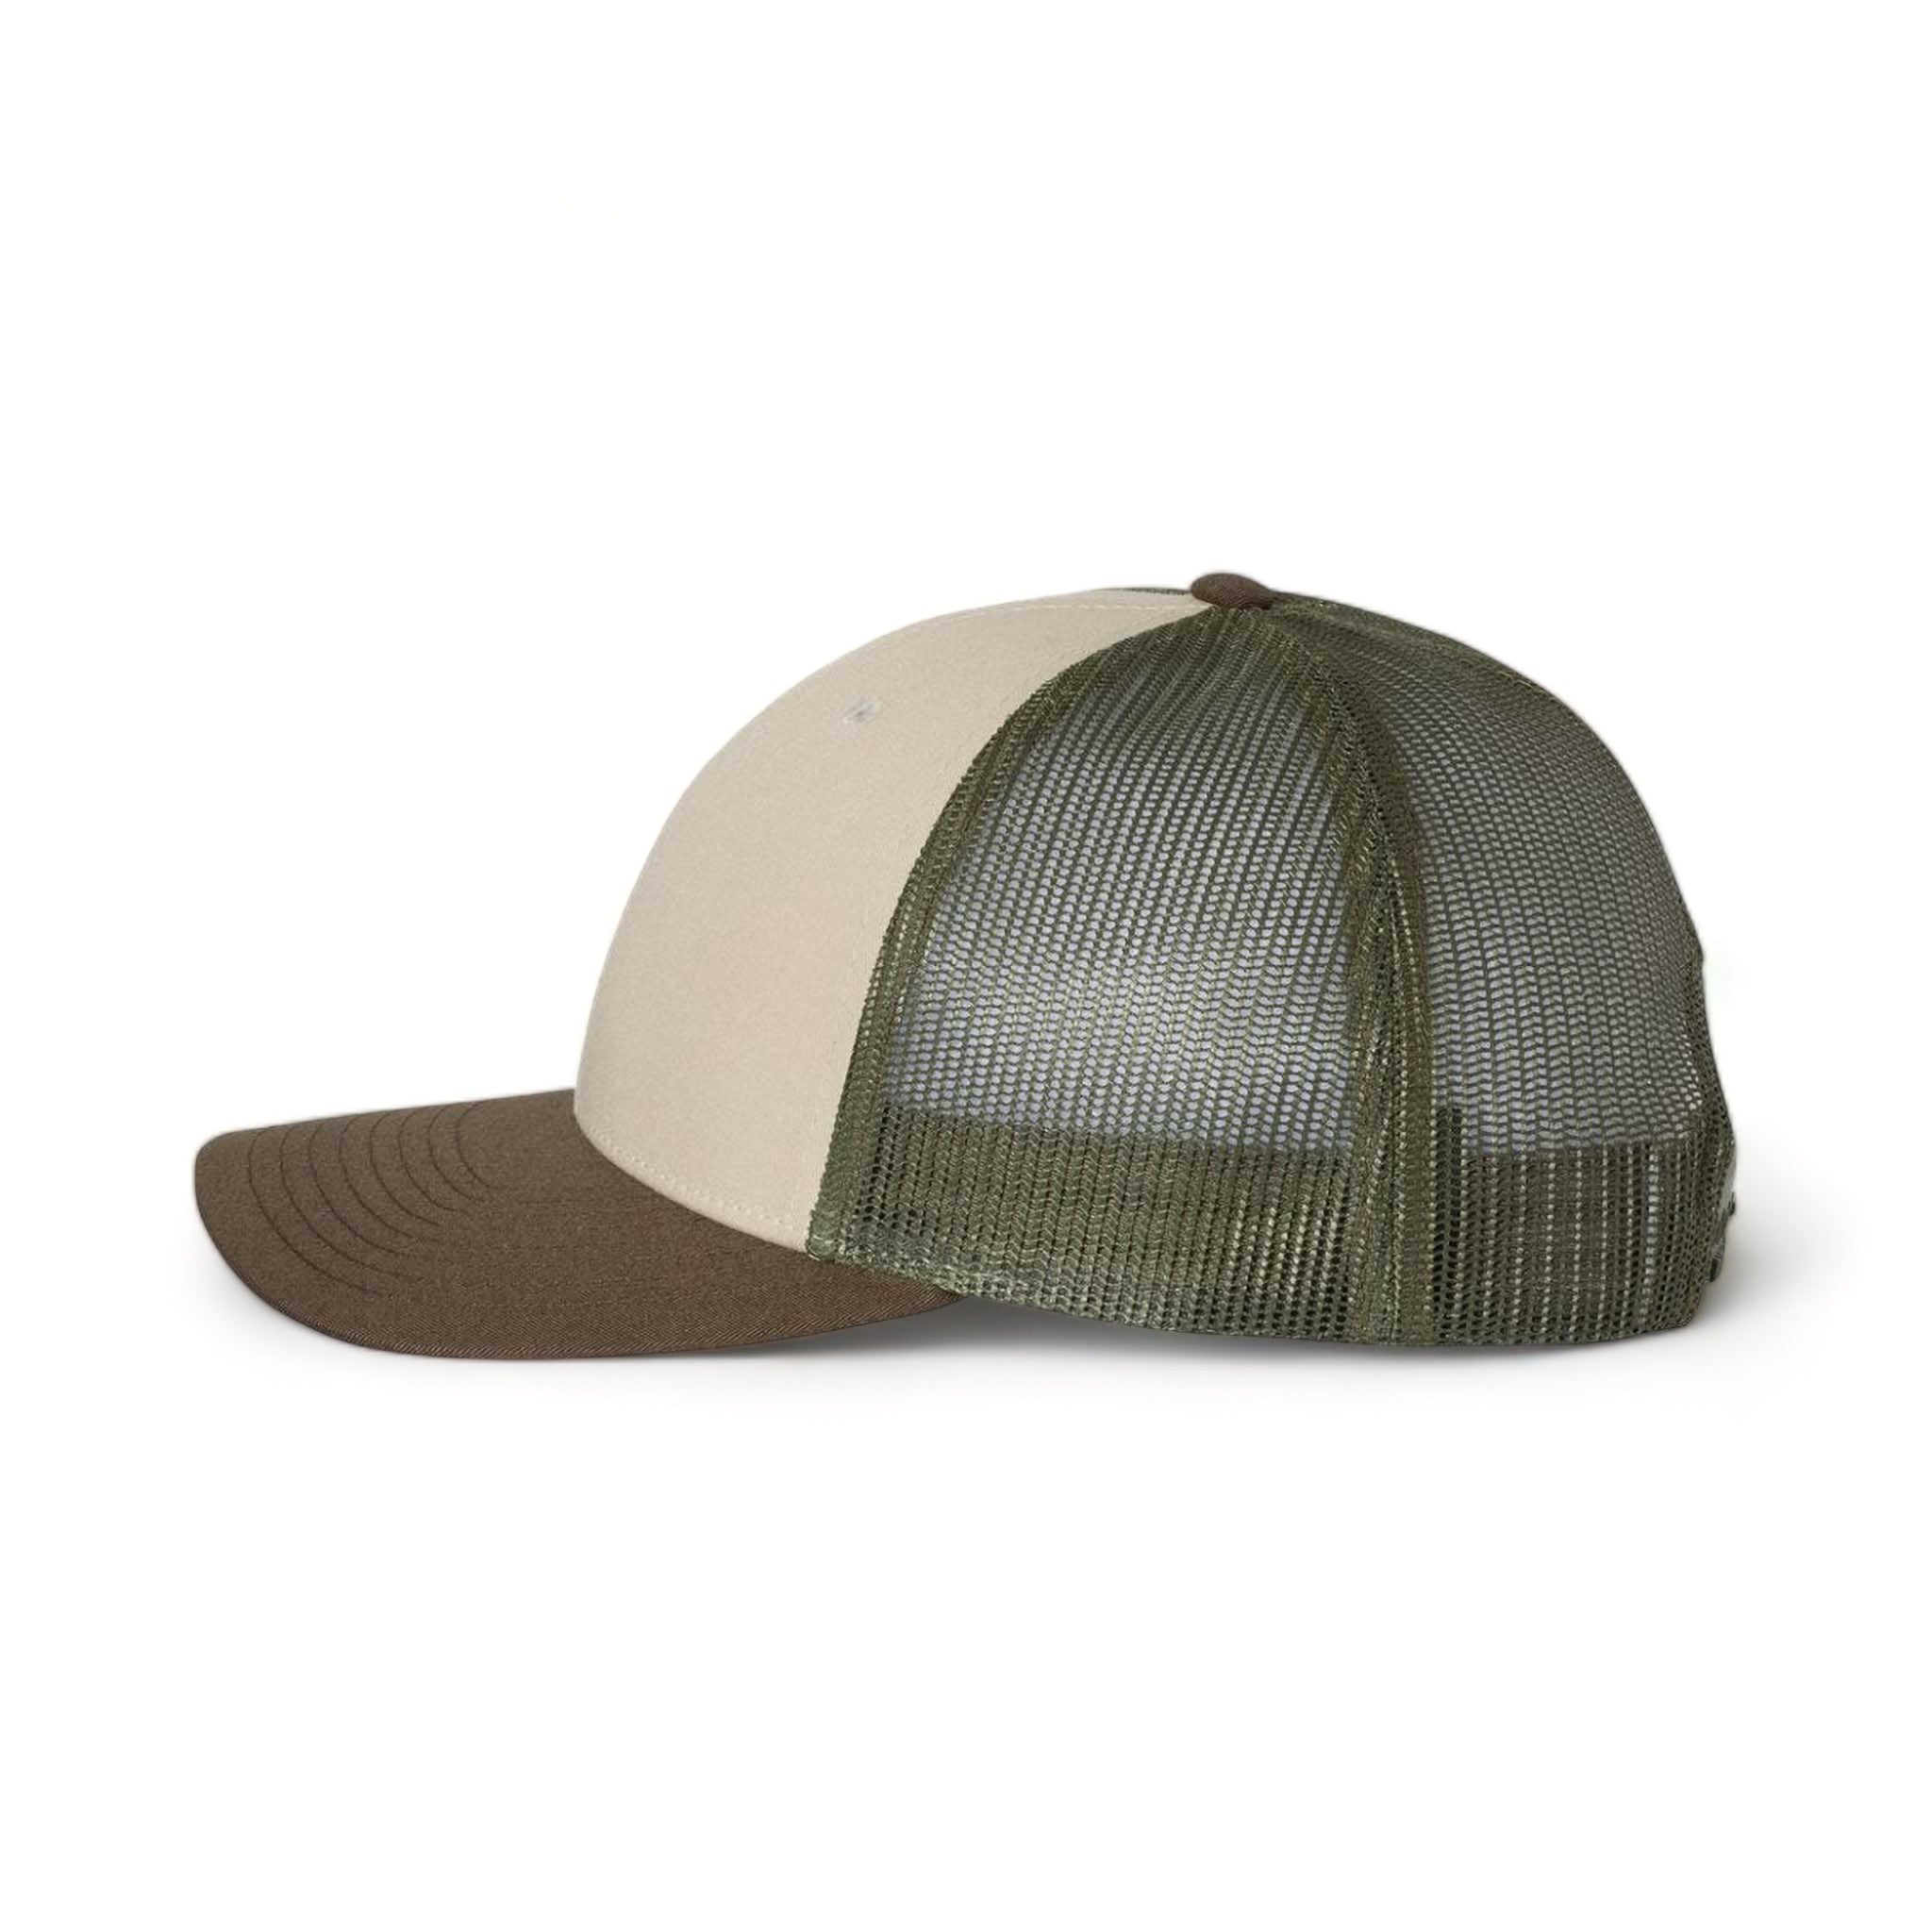 Side view of Richardson 115 custom hat in tan, loden and brown